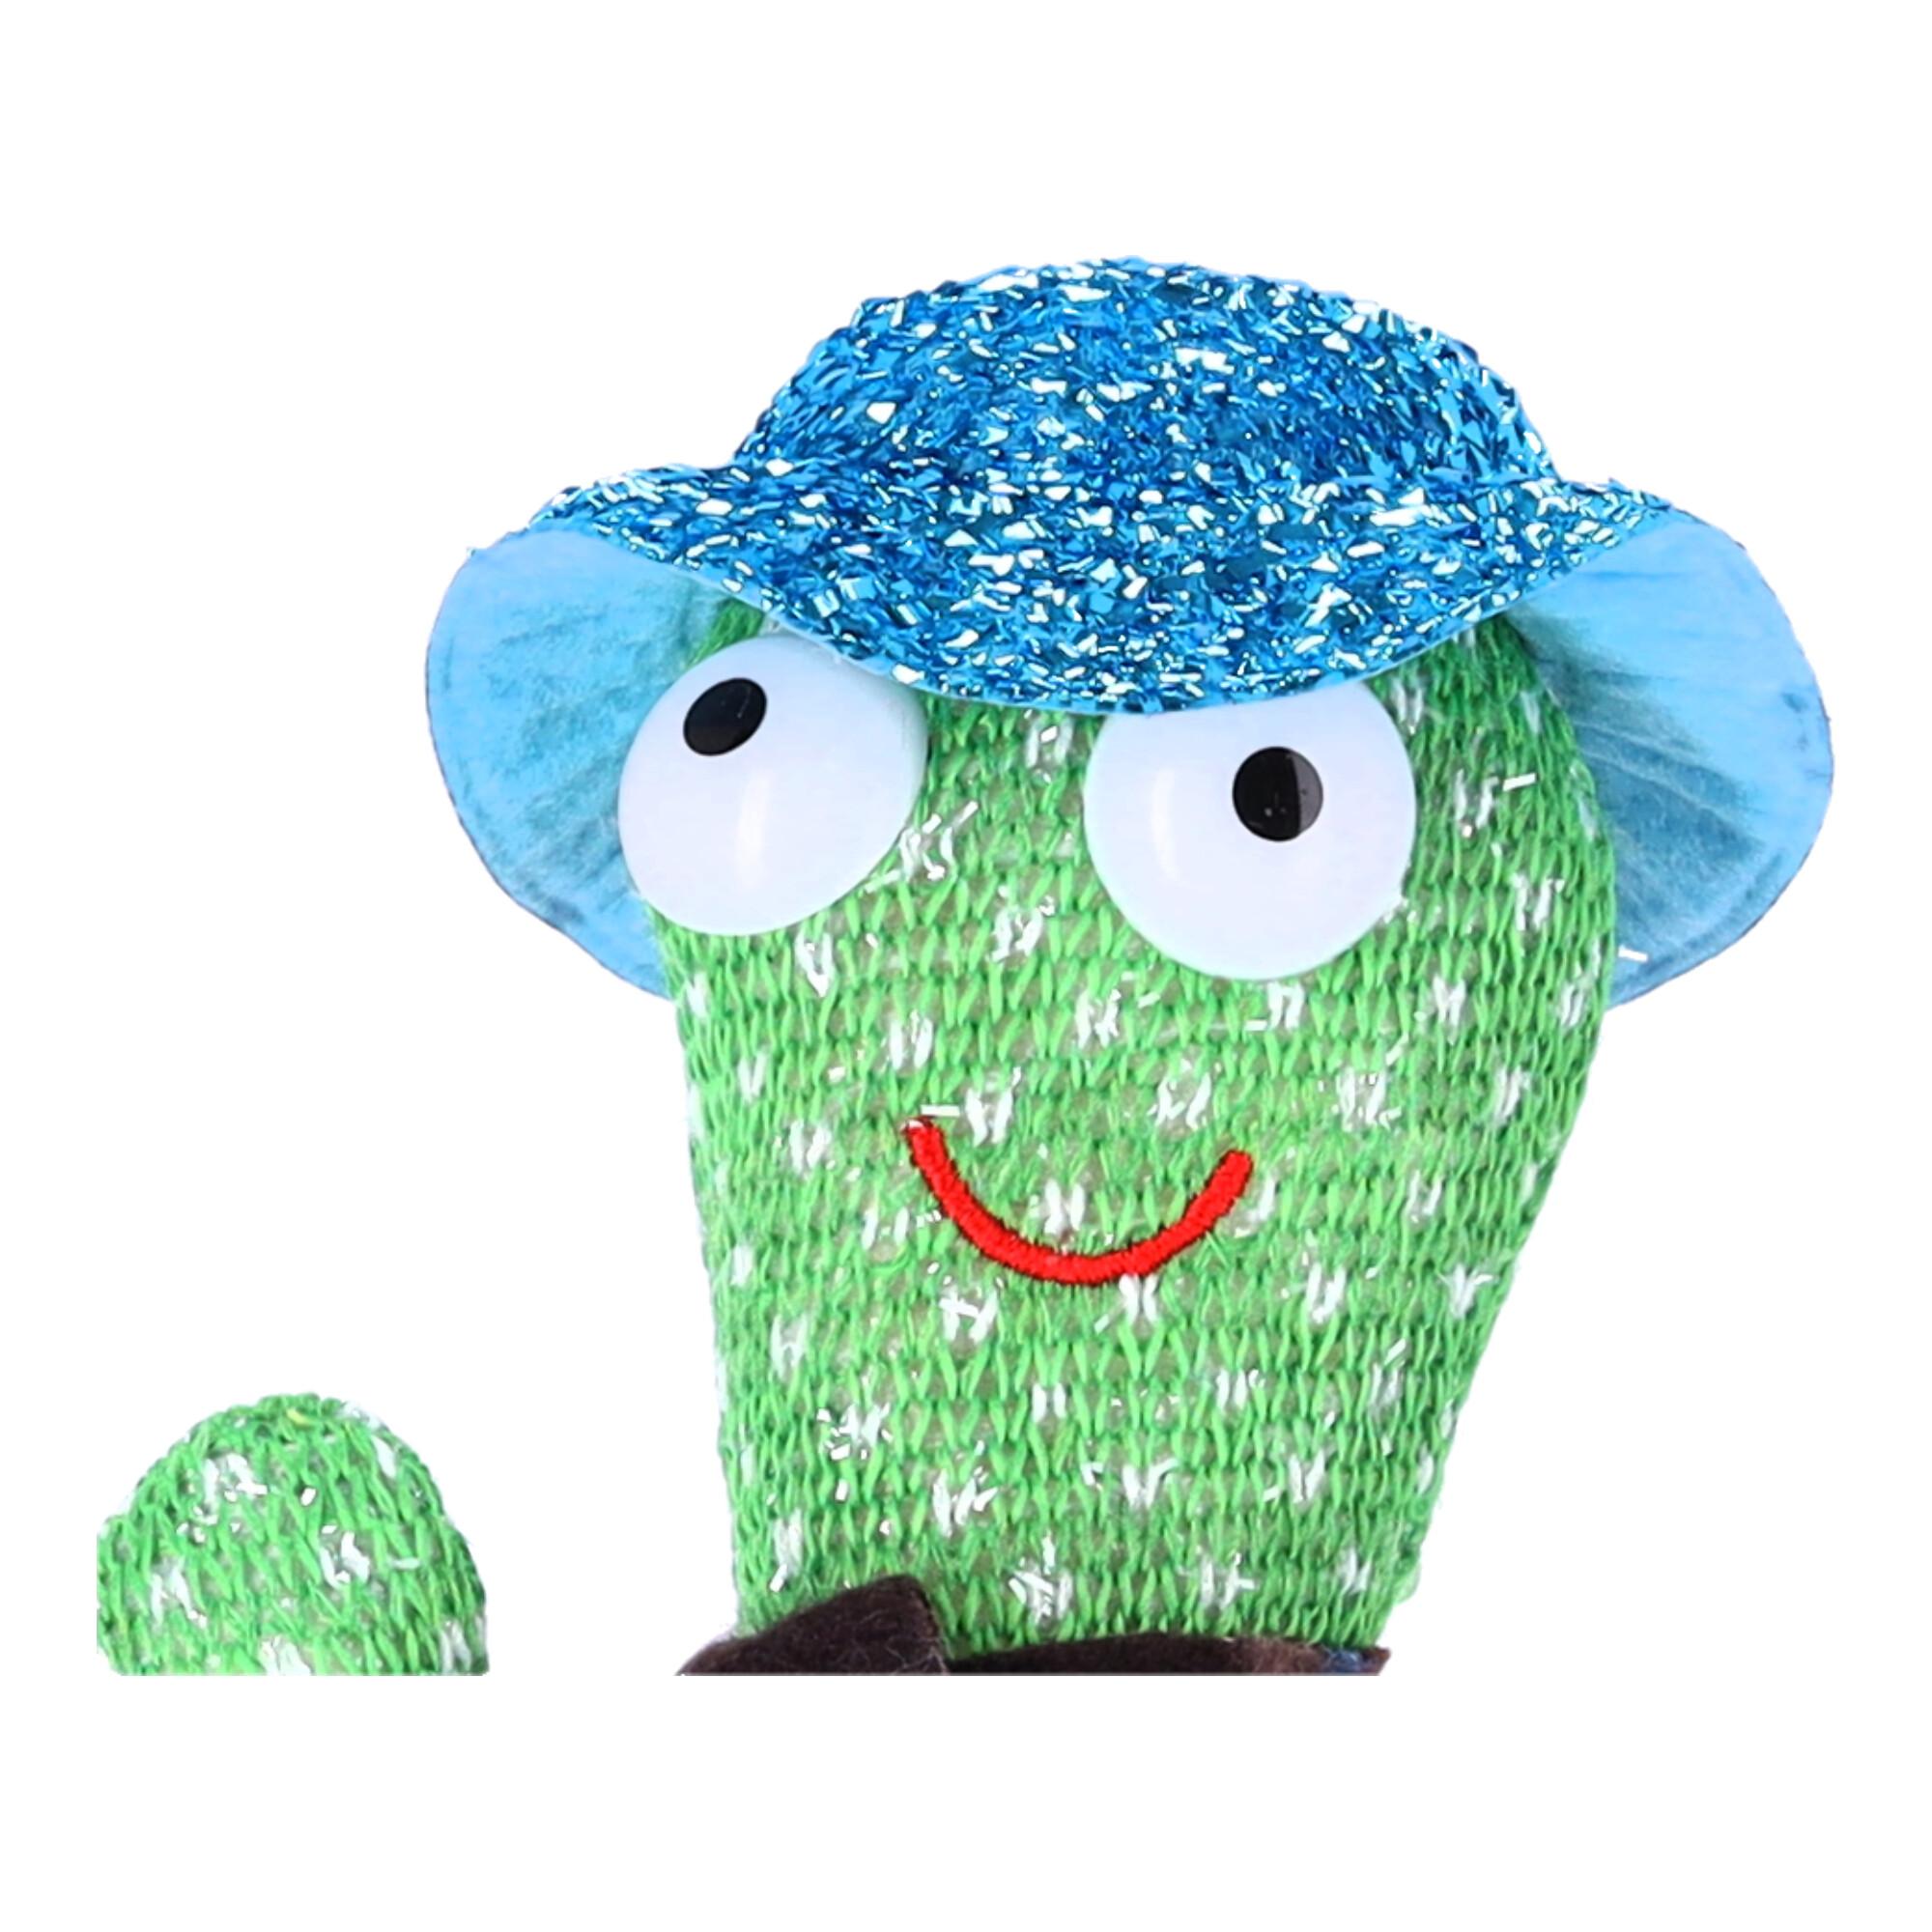 Children's toy - Dancing cactus - with checkered scarf and blue hat